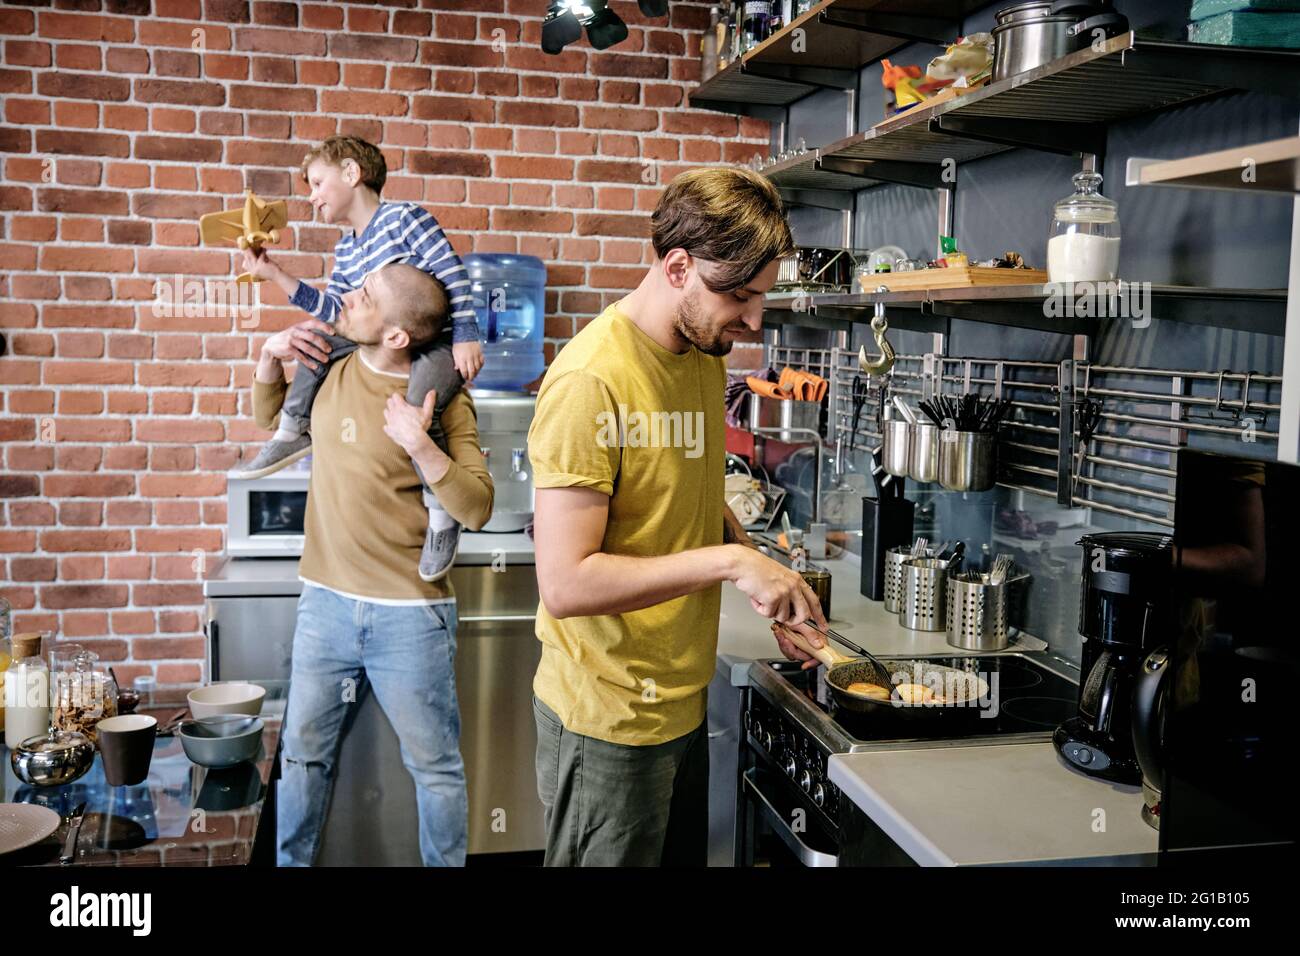 One of two gay men cooking by stove against his husband playing with boy Stock Photo